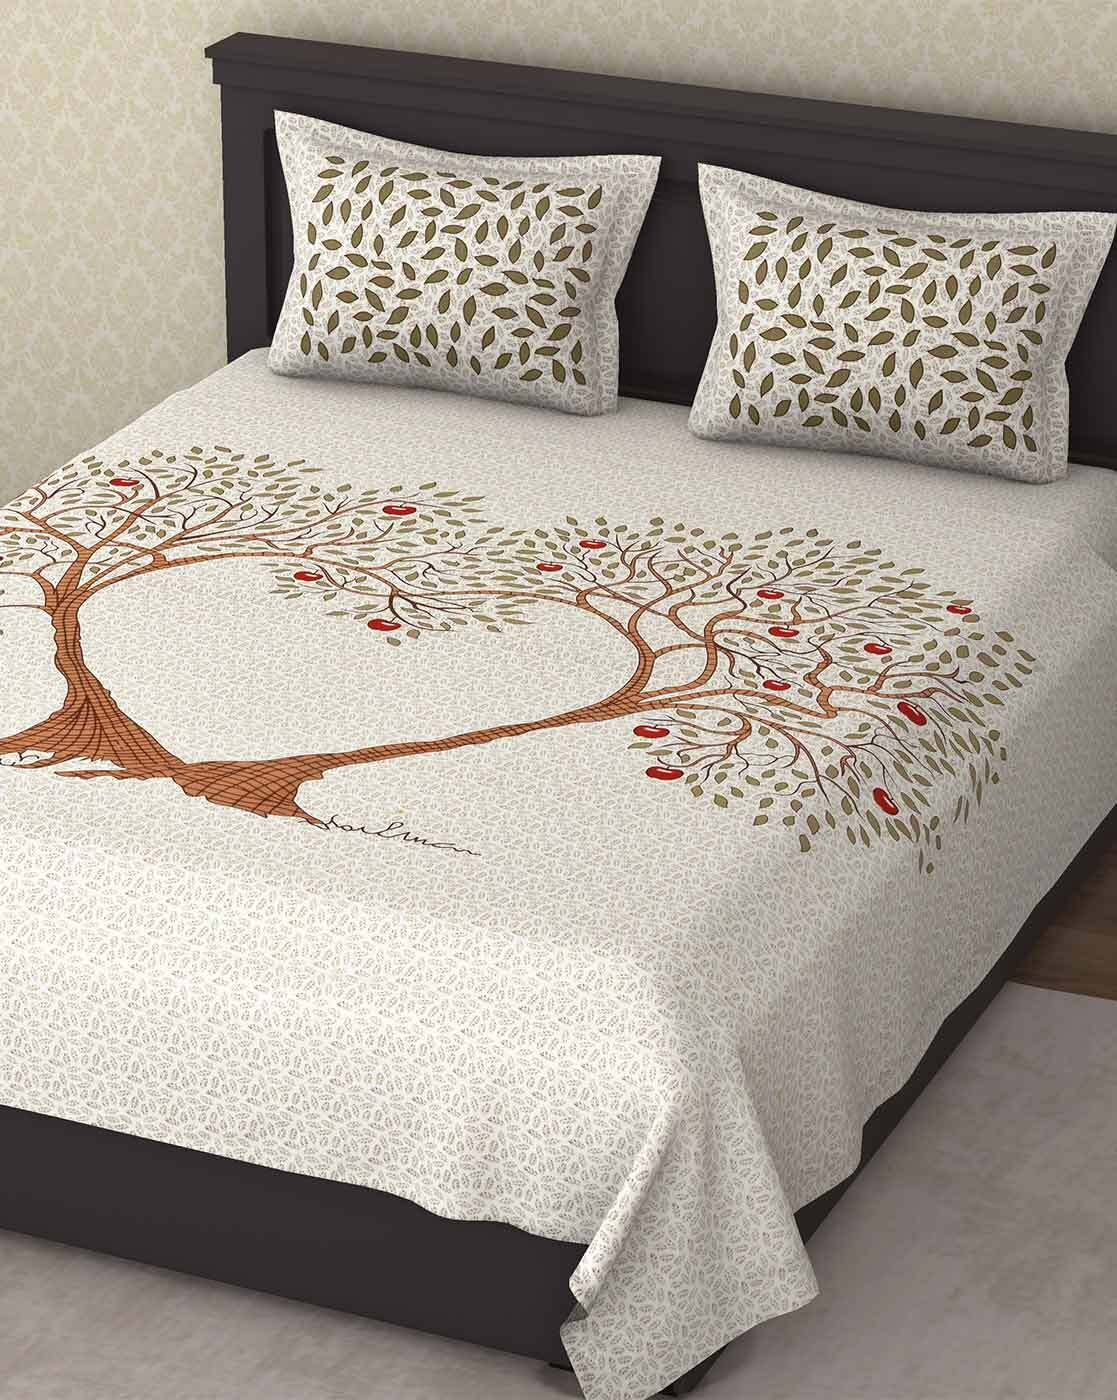 Brown Bedsheets For Home Kitchen, Bed Sheets For King Size Bed